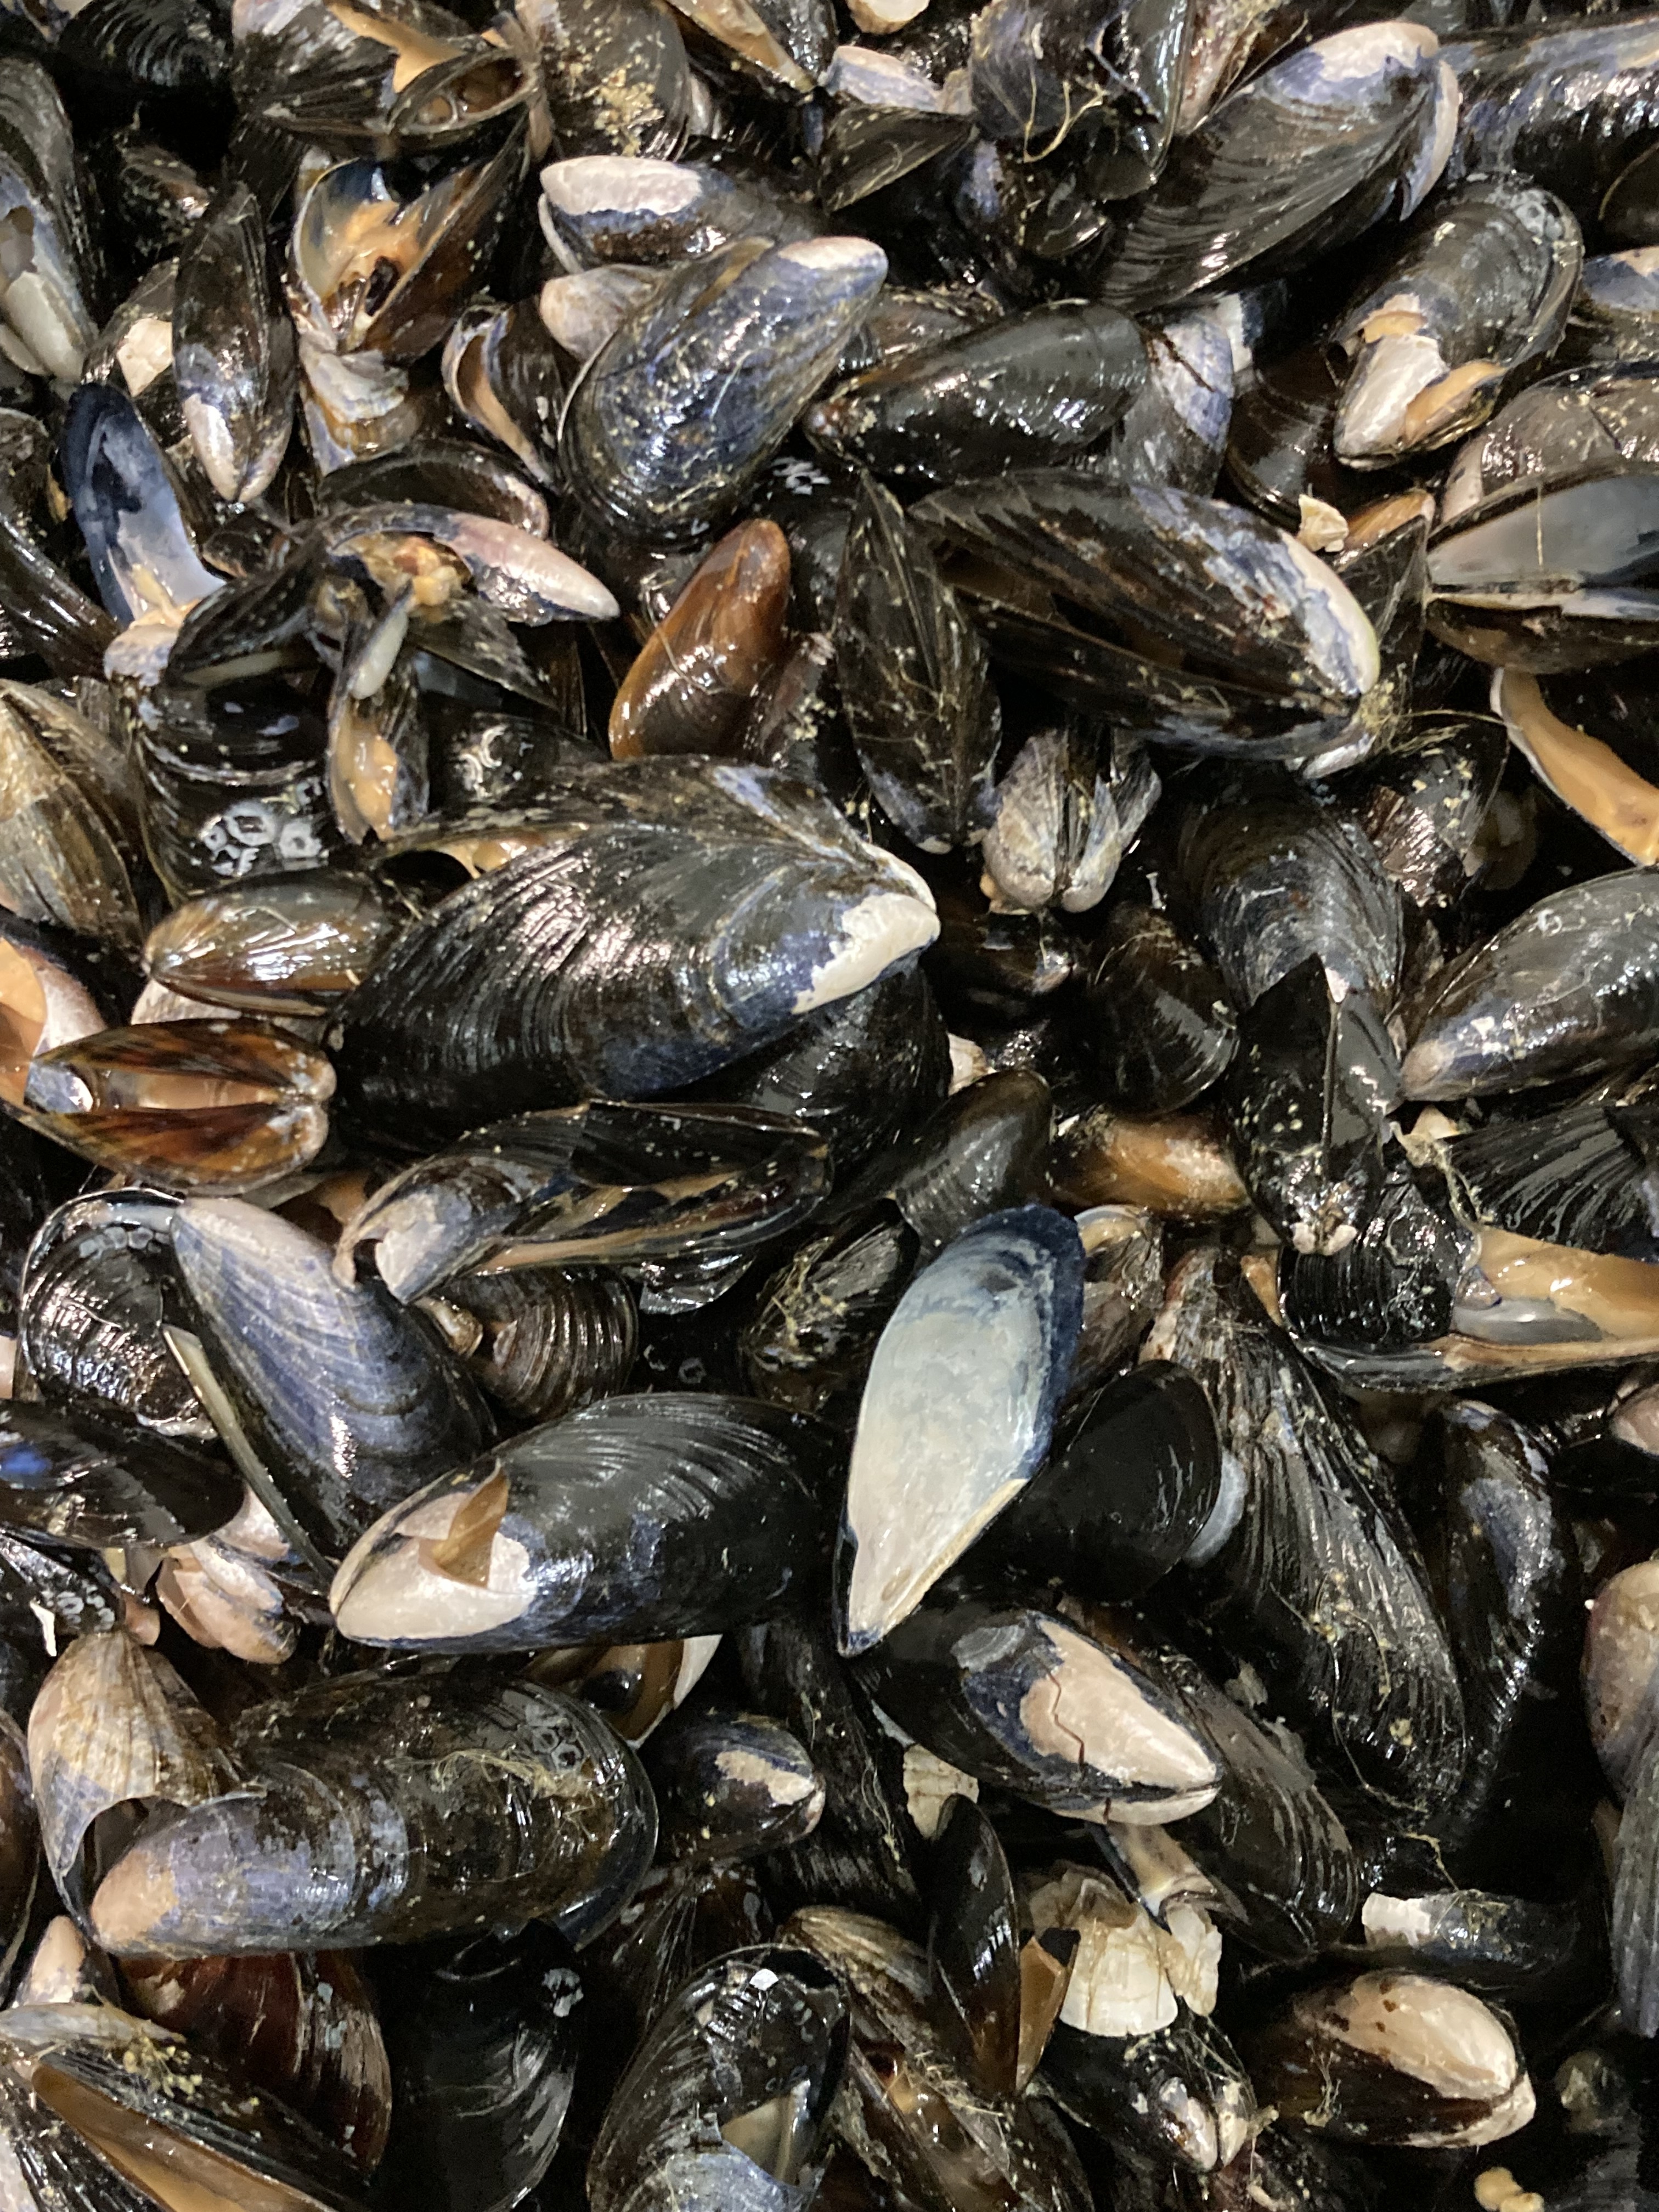 Before mussels are ready for the dining table, they are first sorted from shells that are too big, too small, empty, or crushed. These residues go into the compost, together with materials such as seaweed, sea cucumbers. (Photo: Anne-Kristin Løes)